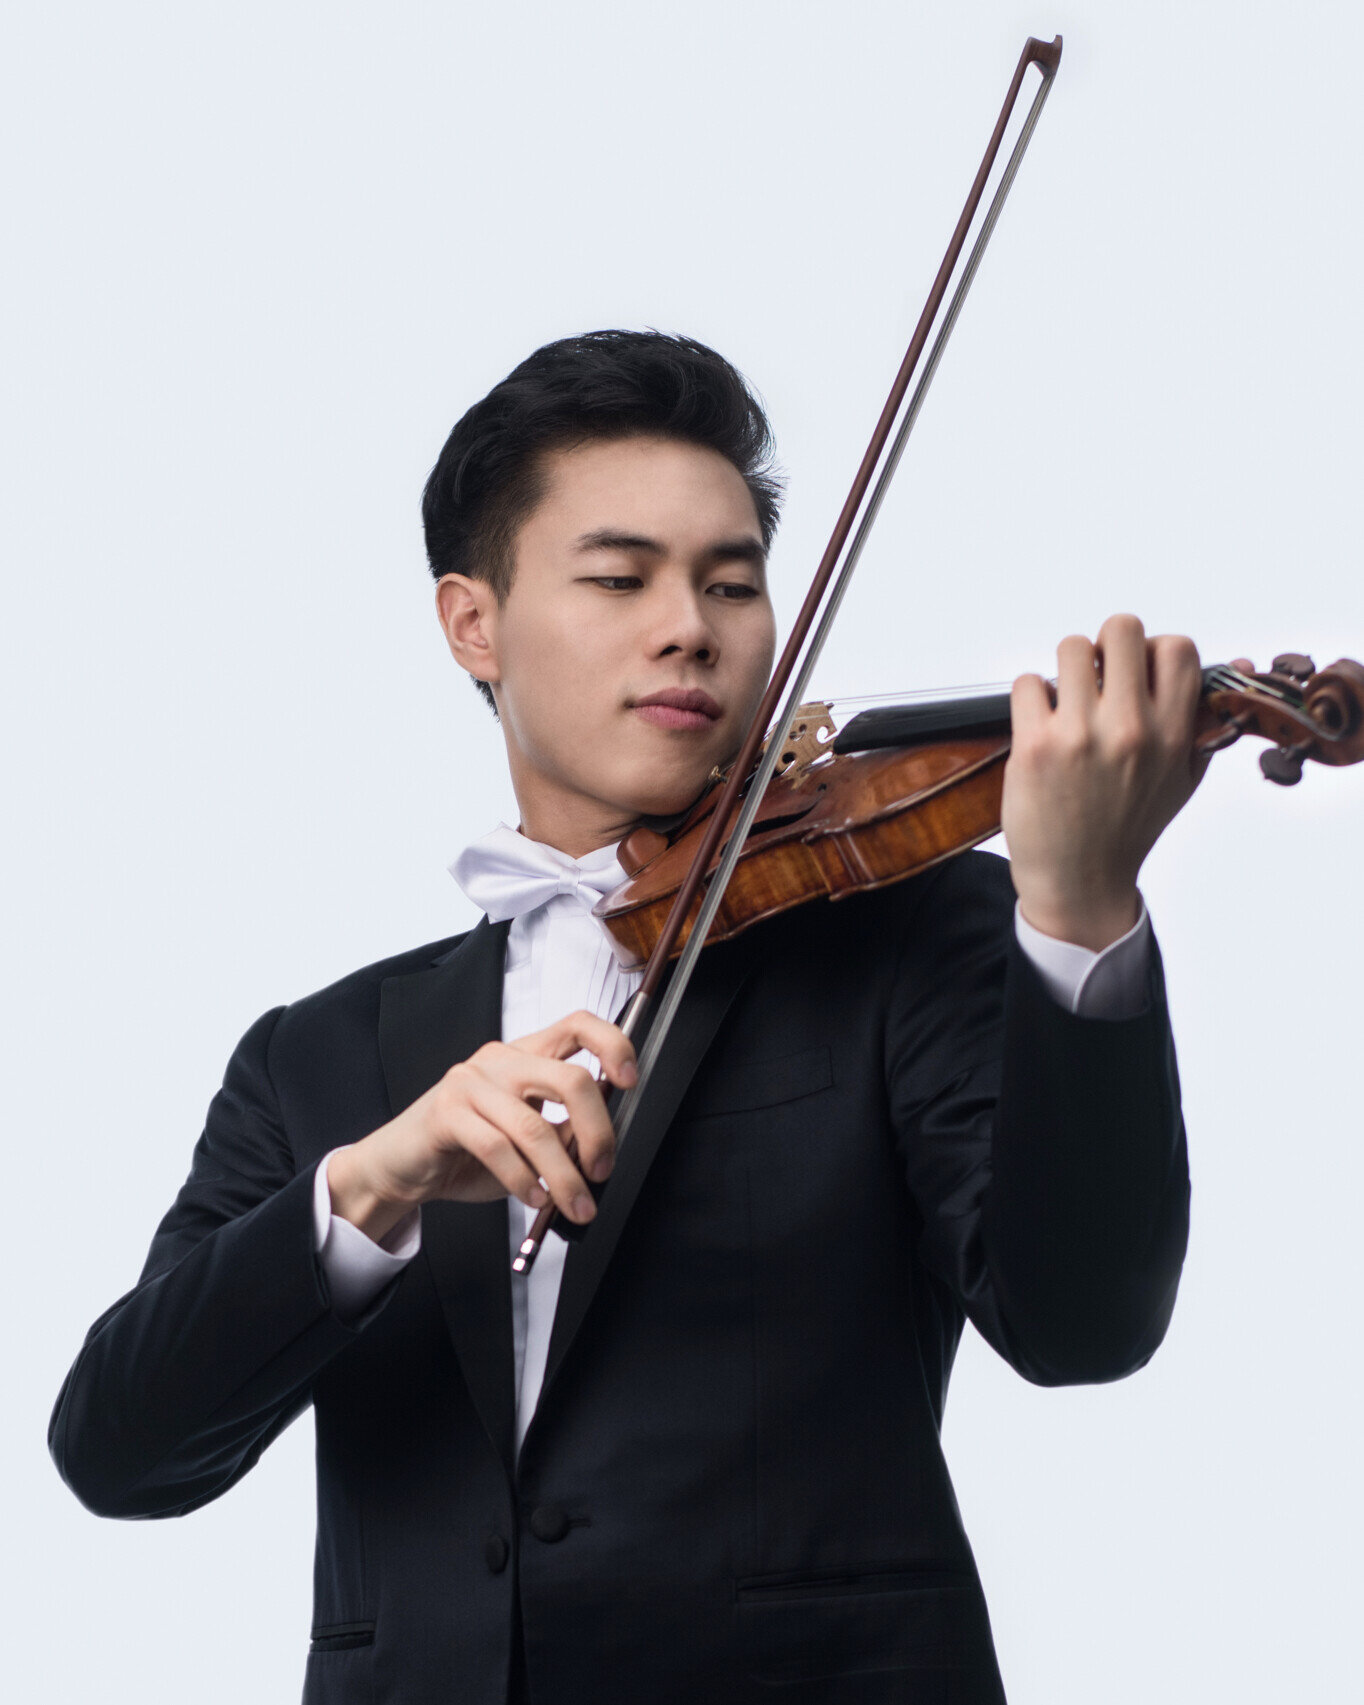 Timothy Chooi - Internationally-acclaimed violinist | Playing Bruch’s Violin Concerto No. 1 and “Exuberant” from Double Concerto for Two Violins and Orchestra